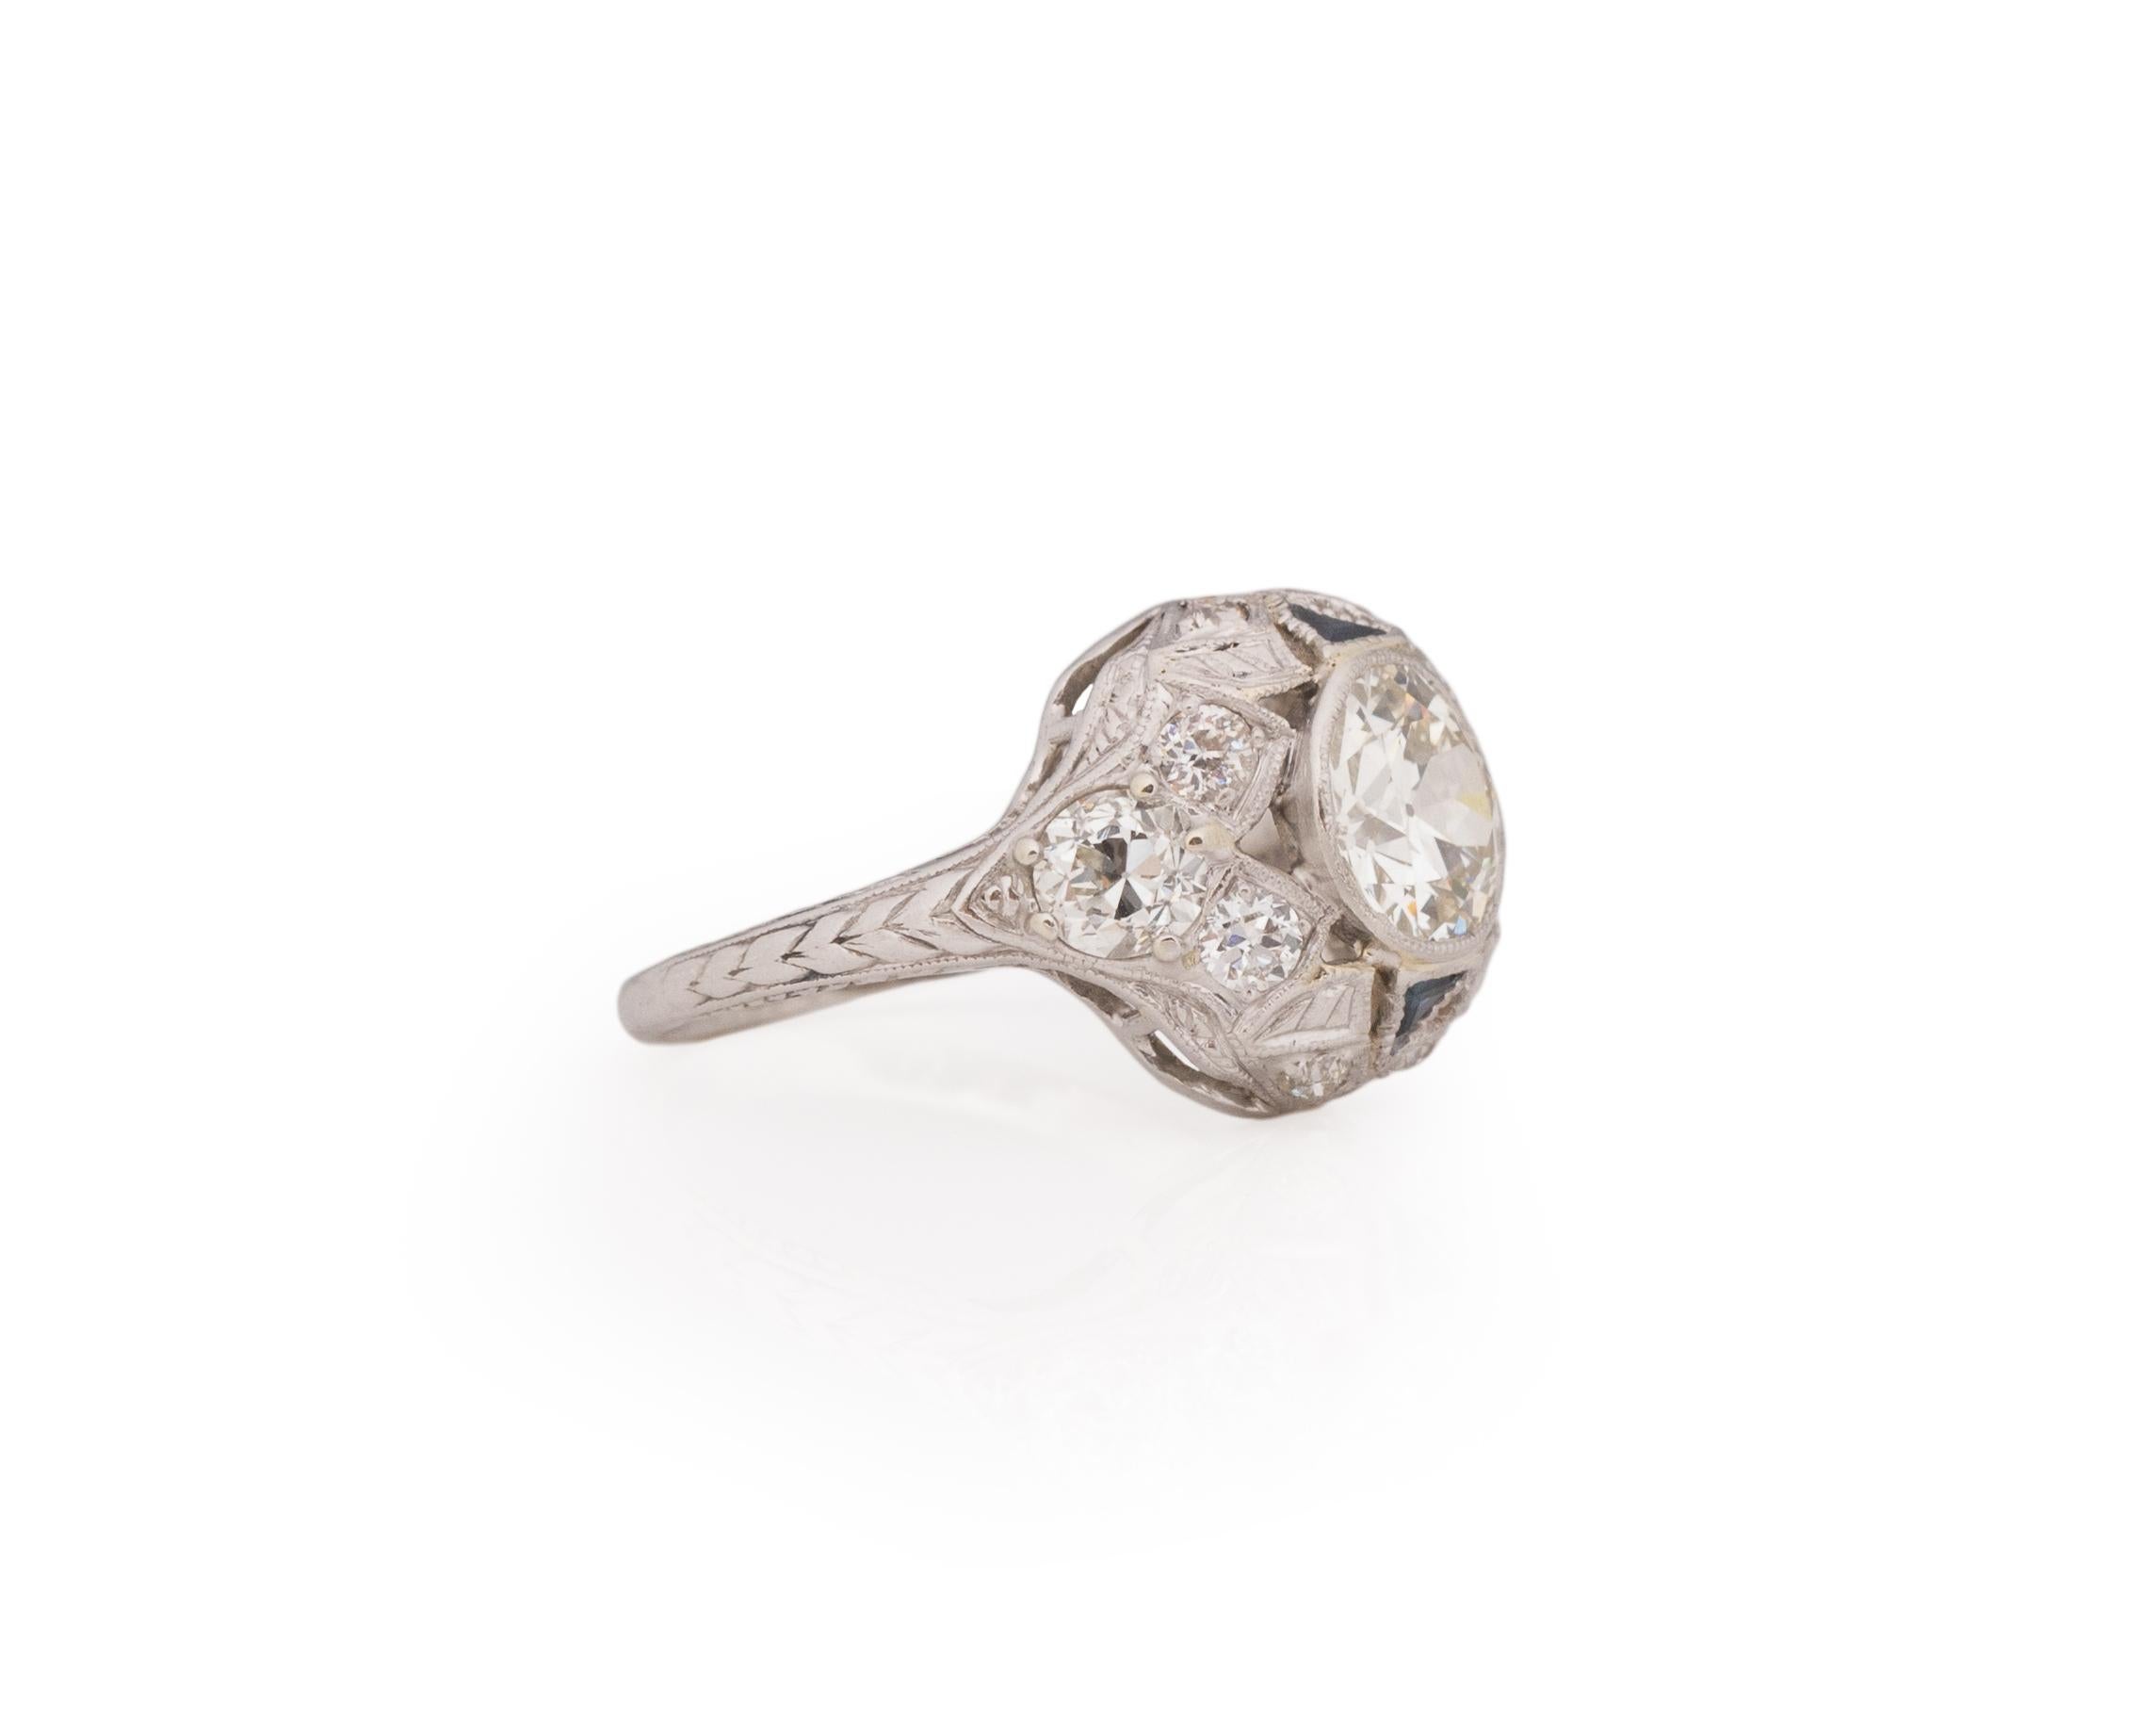 Ring Size: 5.25
Metal Type: Platinum [Hallmarked, and Tested]
Weight: 4.6 grams

Diamond Details:
GIA REPORT #: 6223460714
Weight: 1.31ct
Cut: Old European brilliant
Color: L
Clarity: SI1
Measurements: 7.27mm x 7.03mm x 4.04mm

Finger to Top of